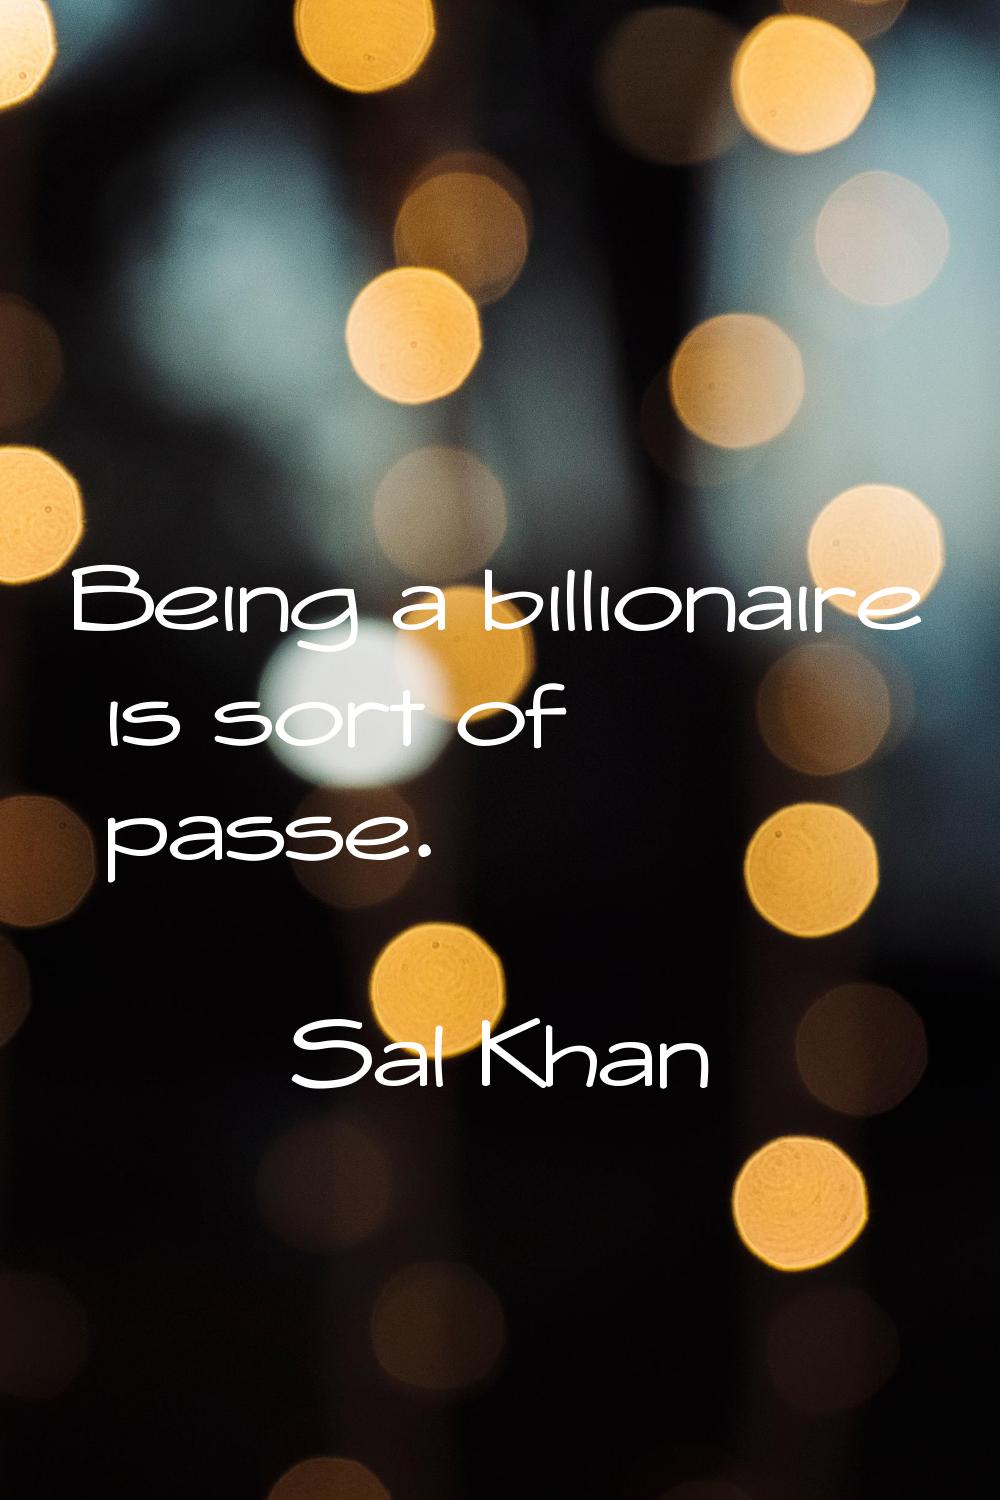 Being a billionaire is sort of passe.